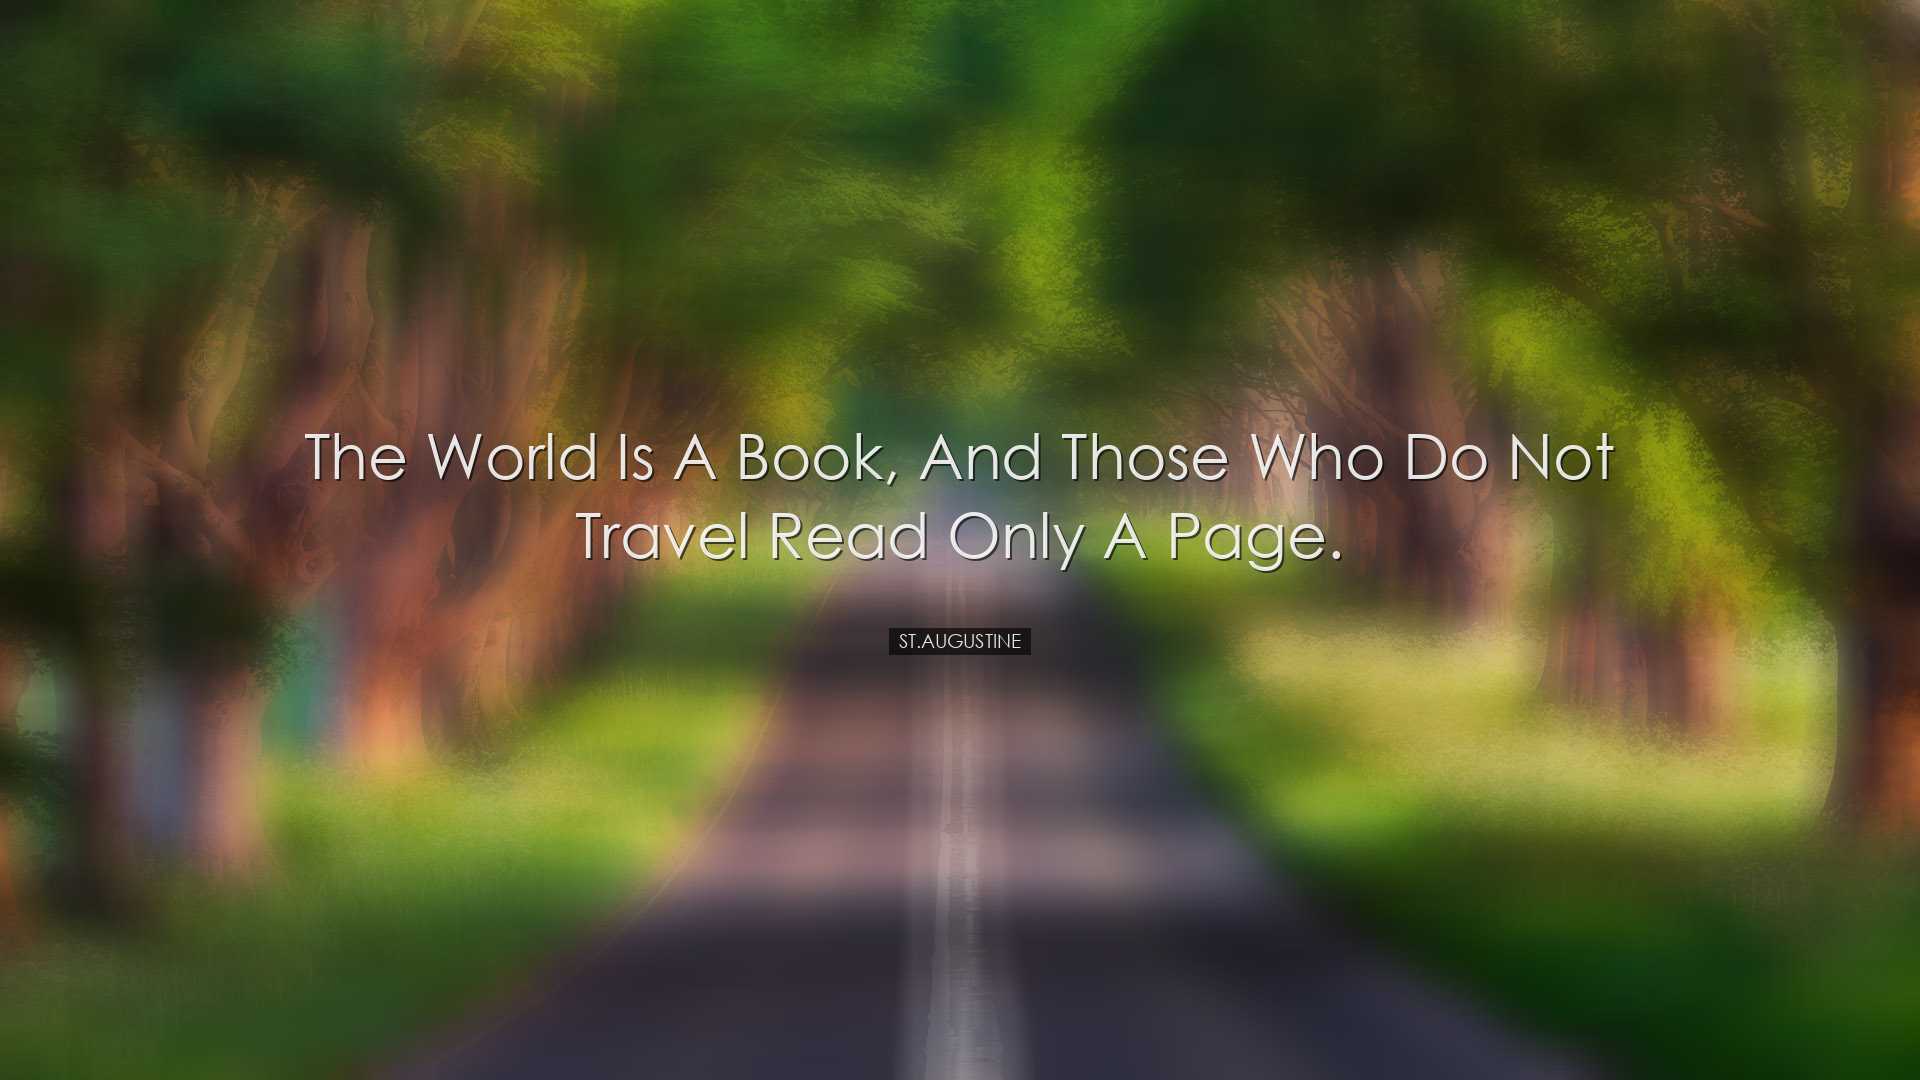 The World is a book, and those who do not travel read only a page.